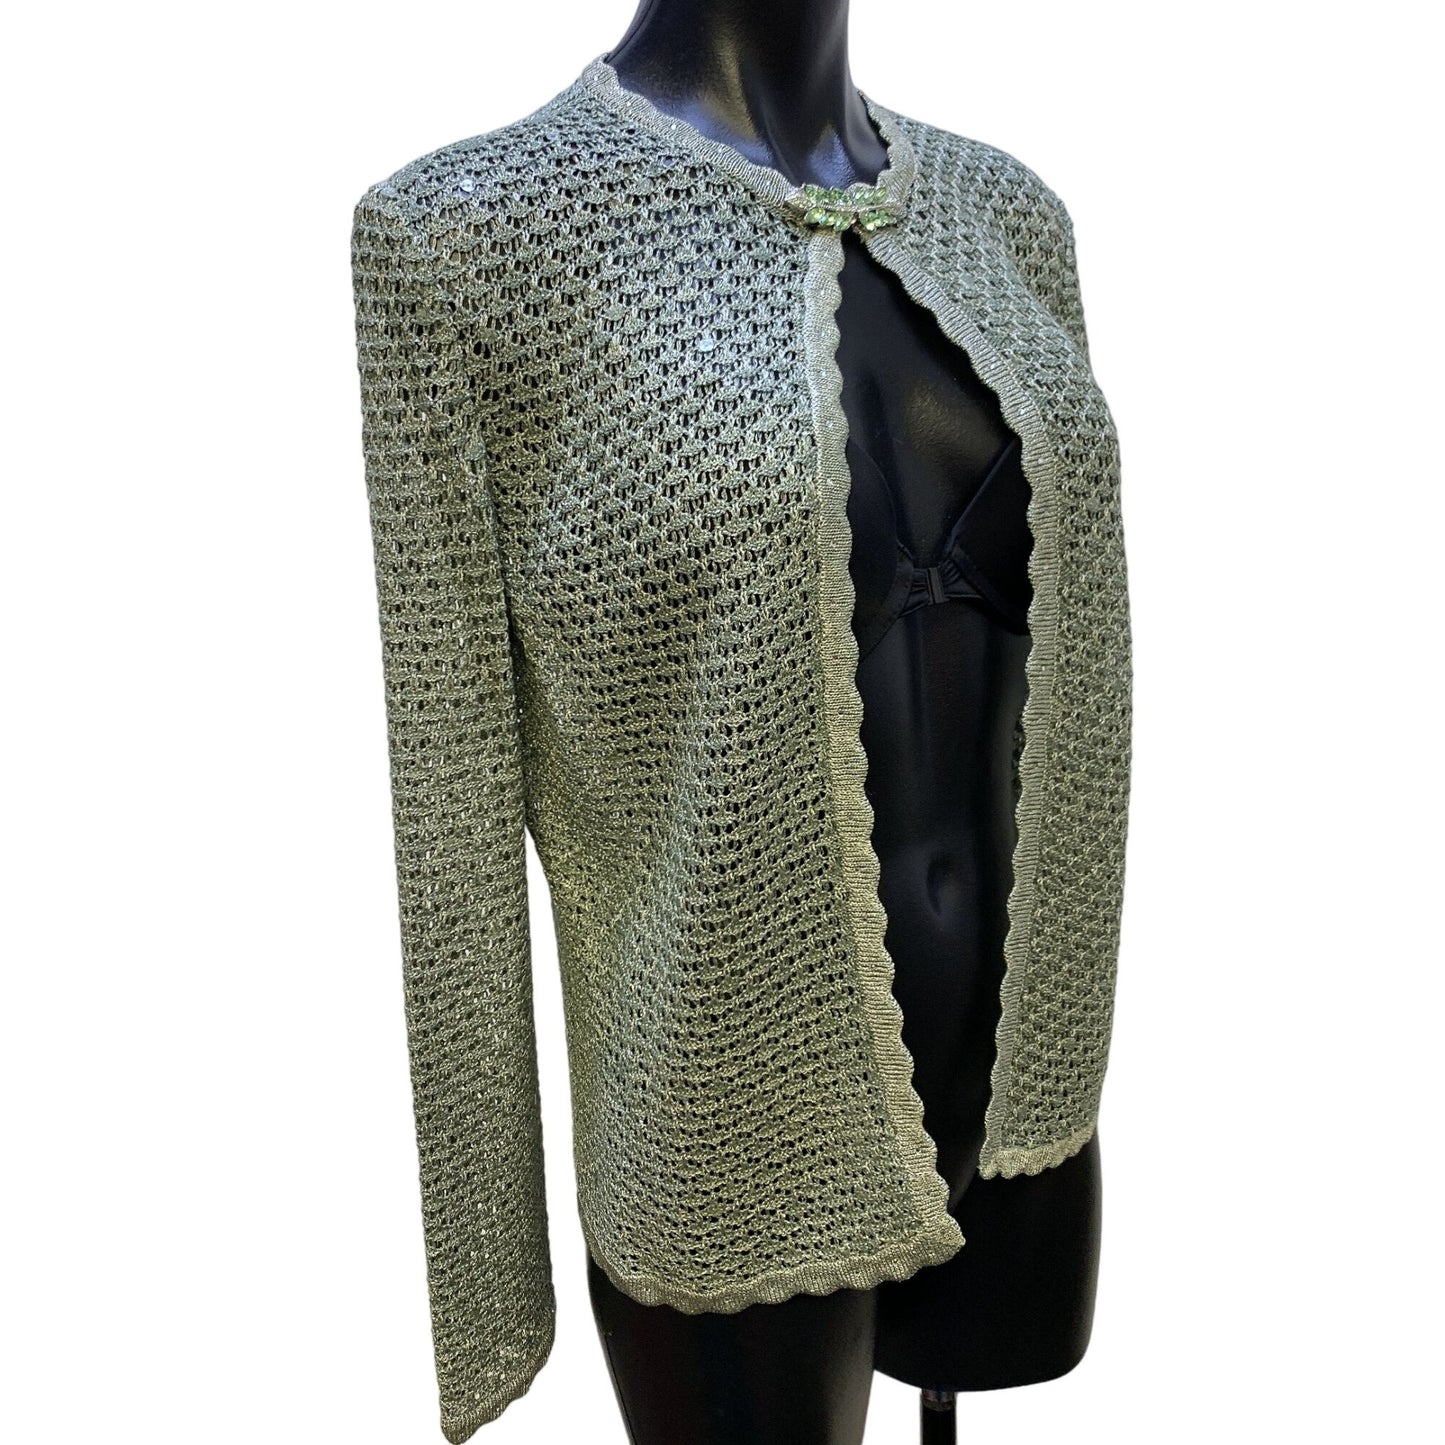 *St. John Evening by Marie Gray Shimmery Green Knit Cardigan w/Jeweled Clasp Size 8